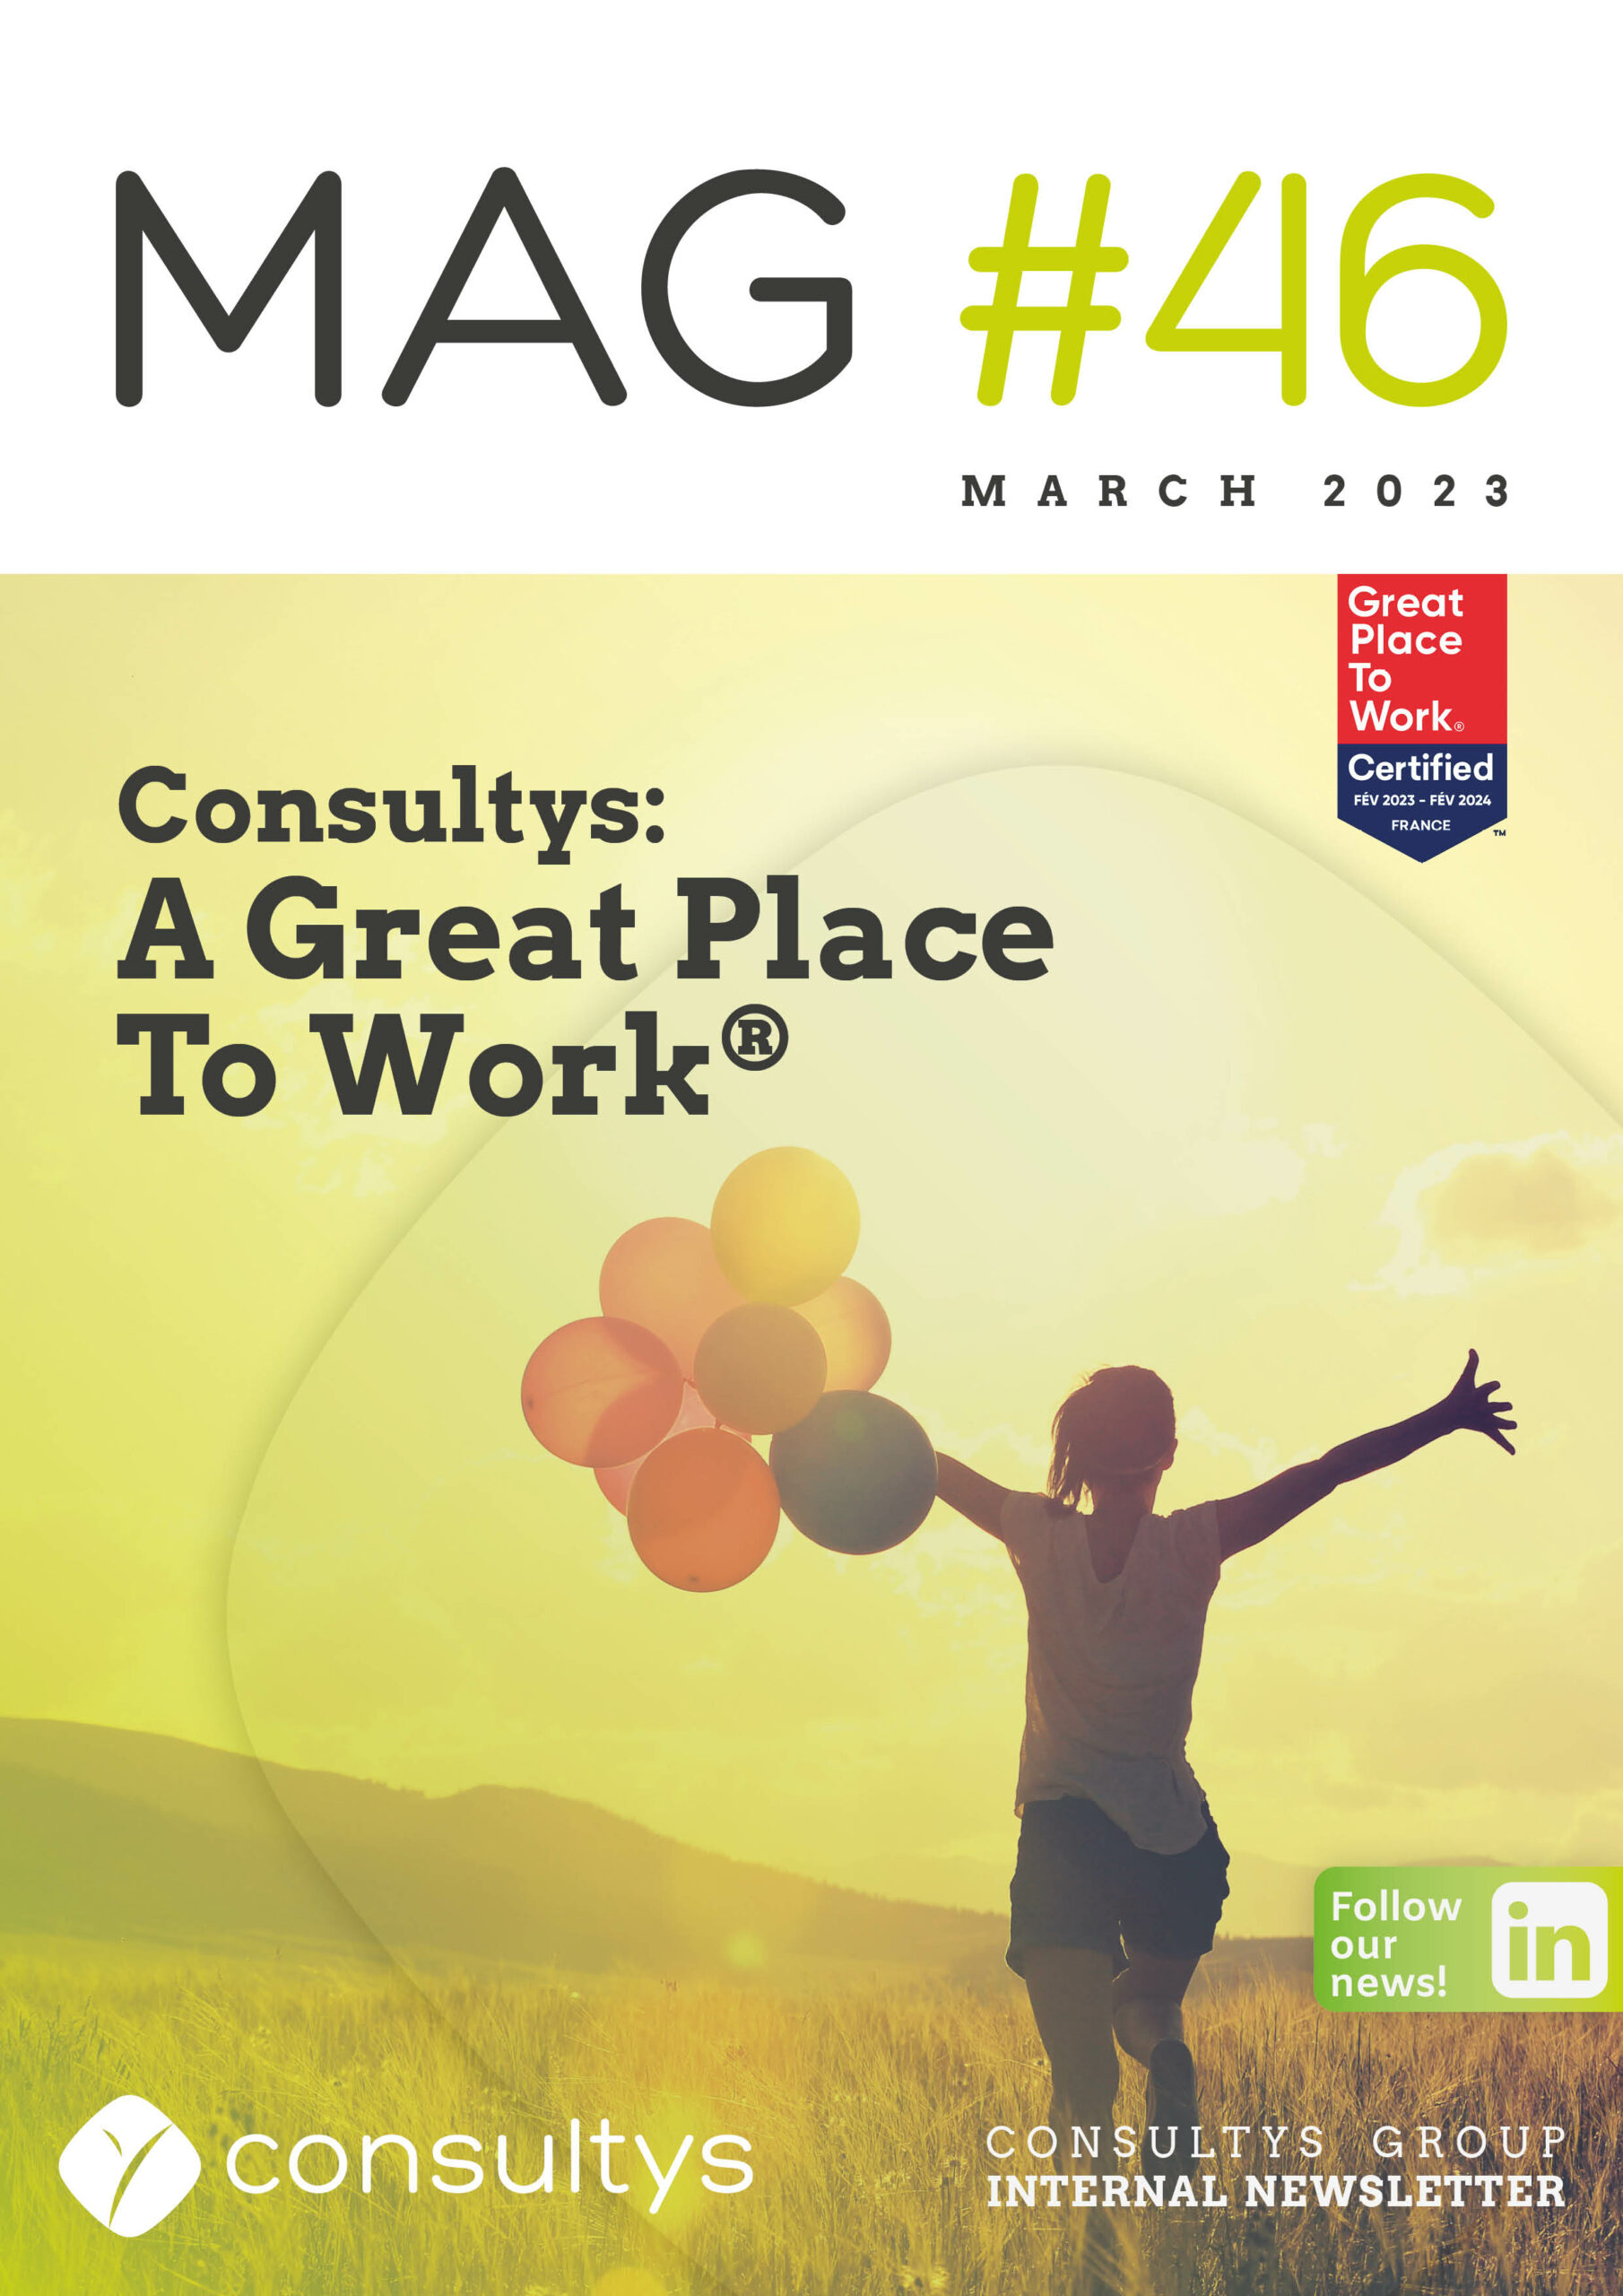 MAG #46 I March 2023